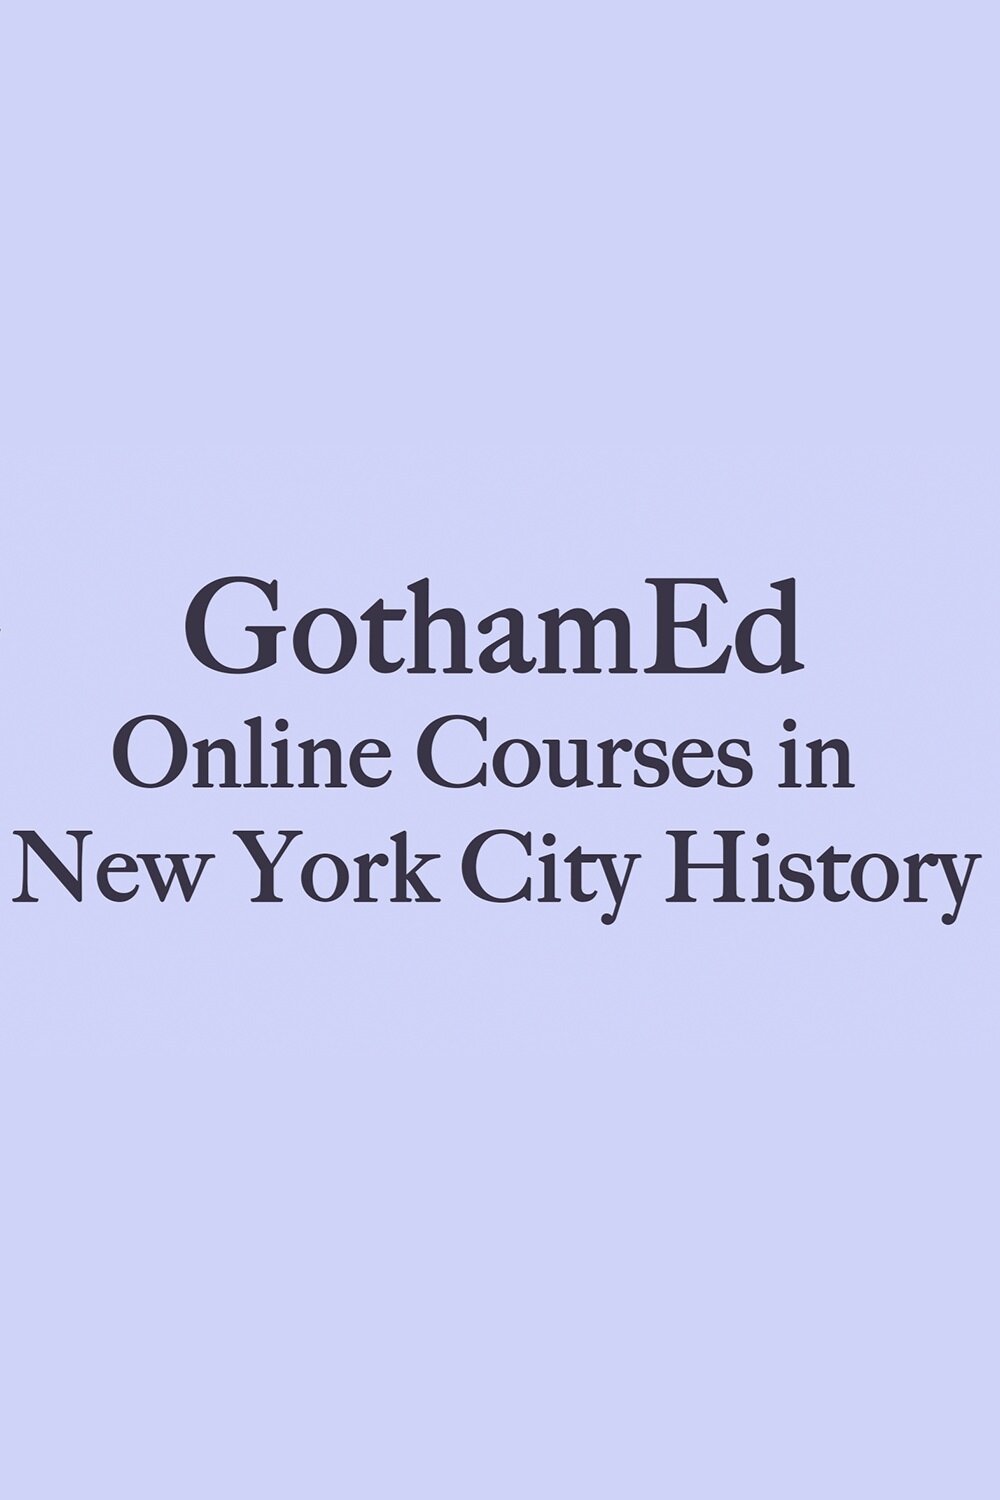 Announcing GothamEd — The Gotham Center for New York City History